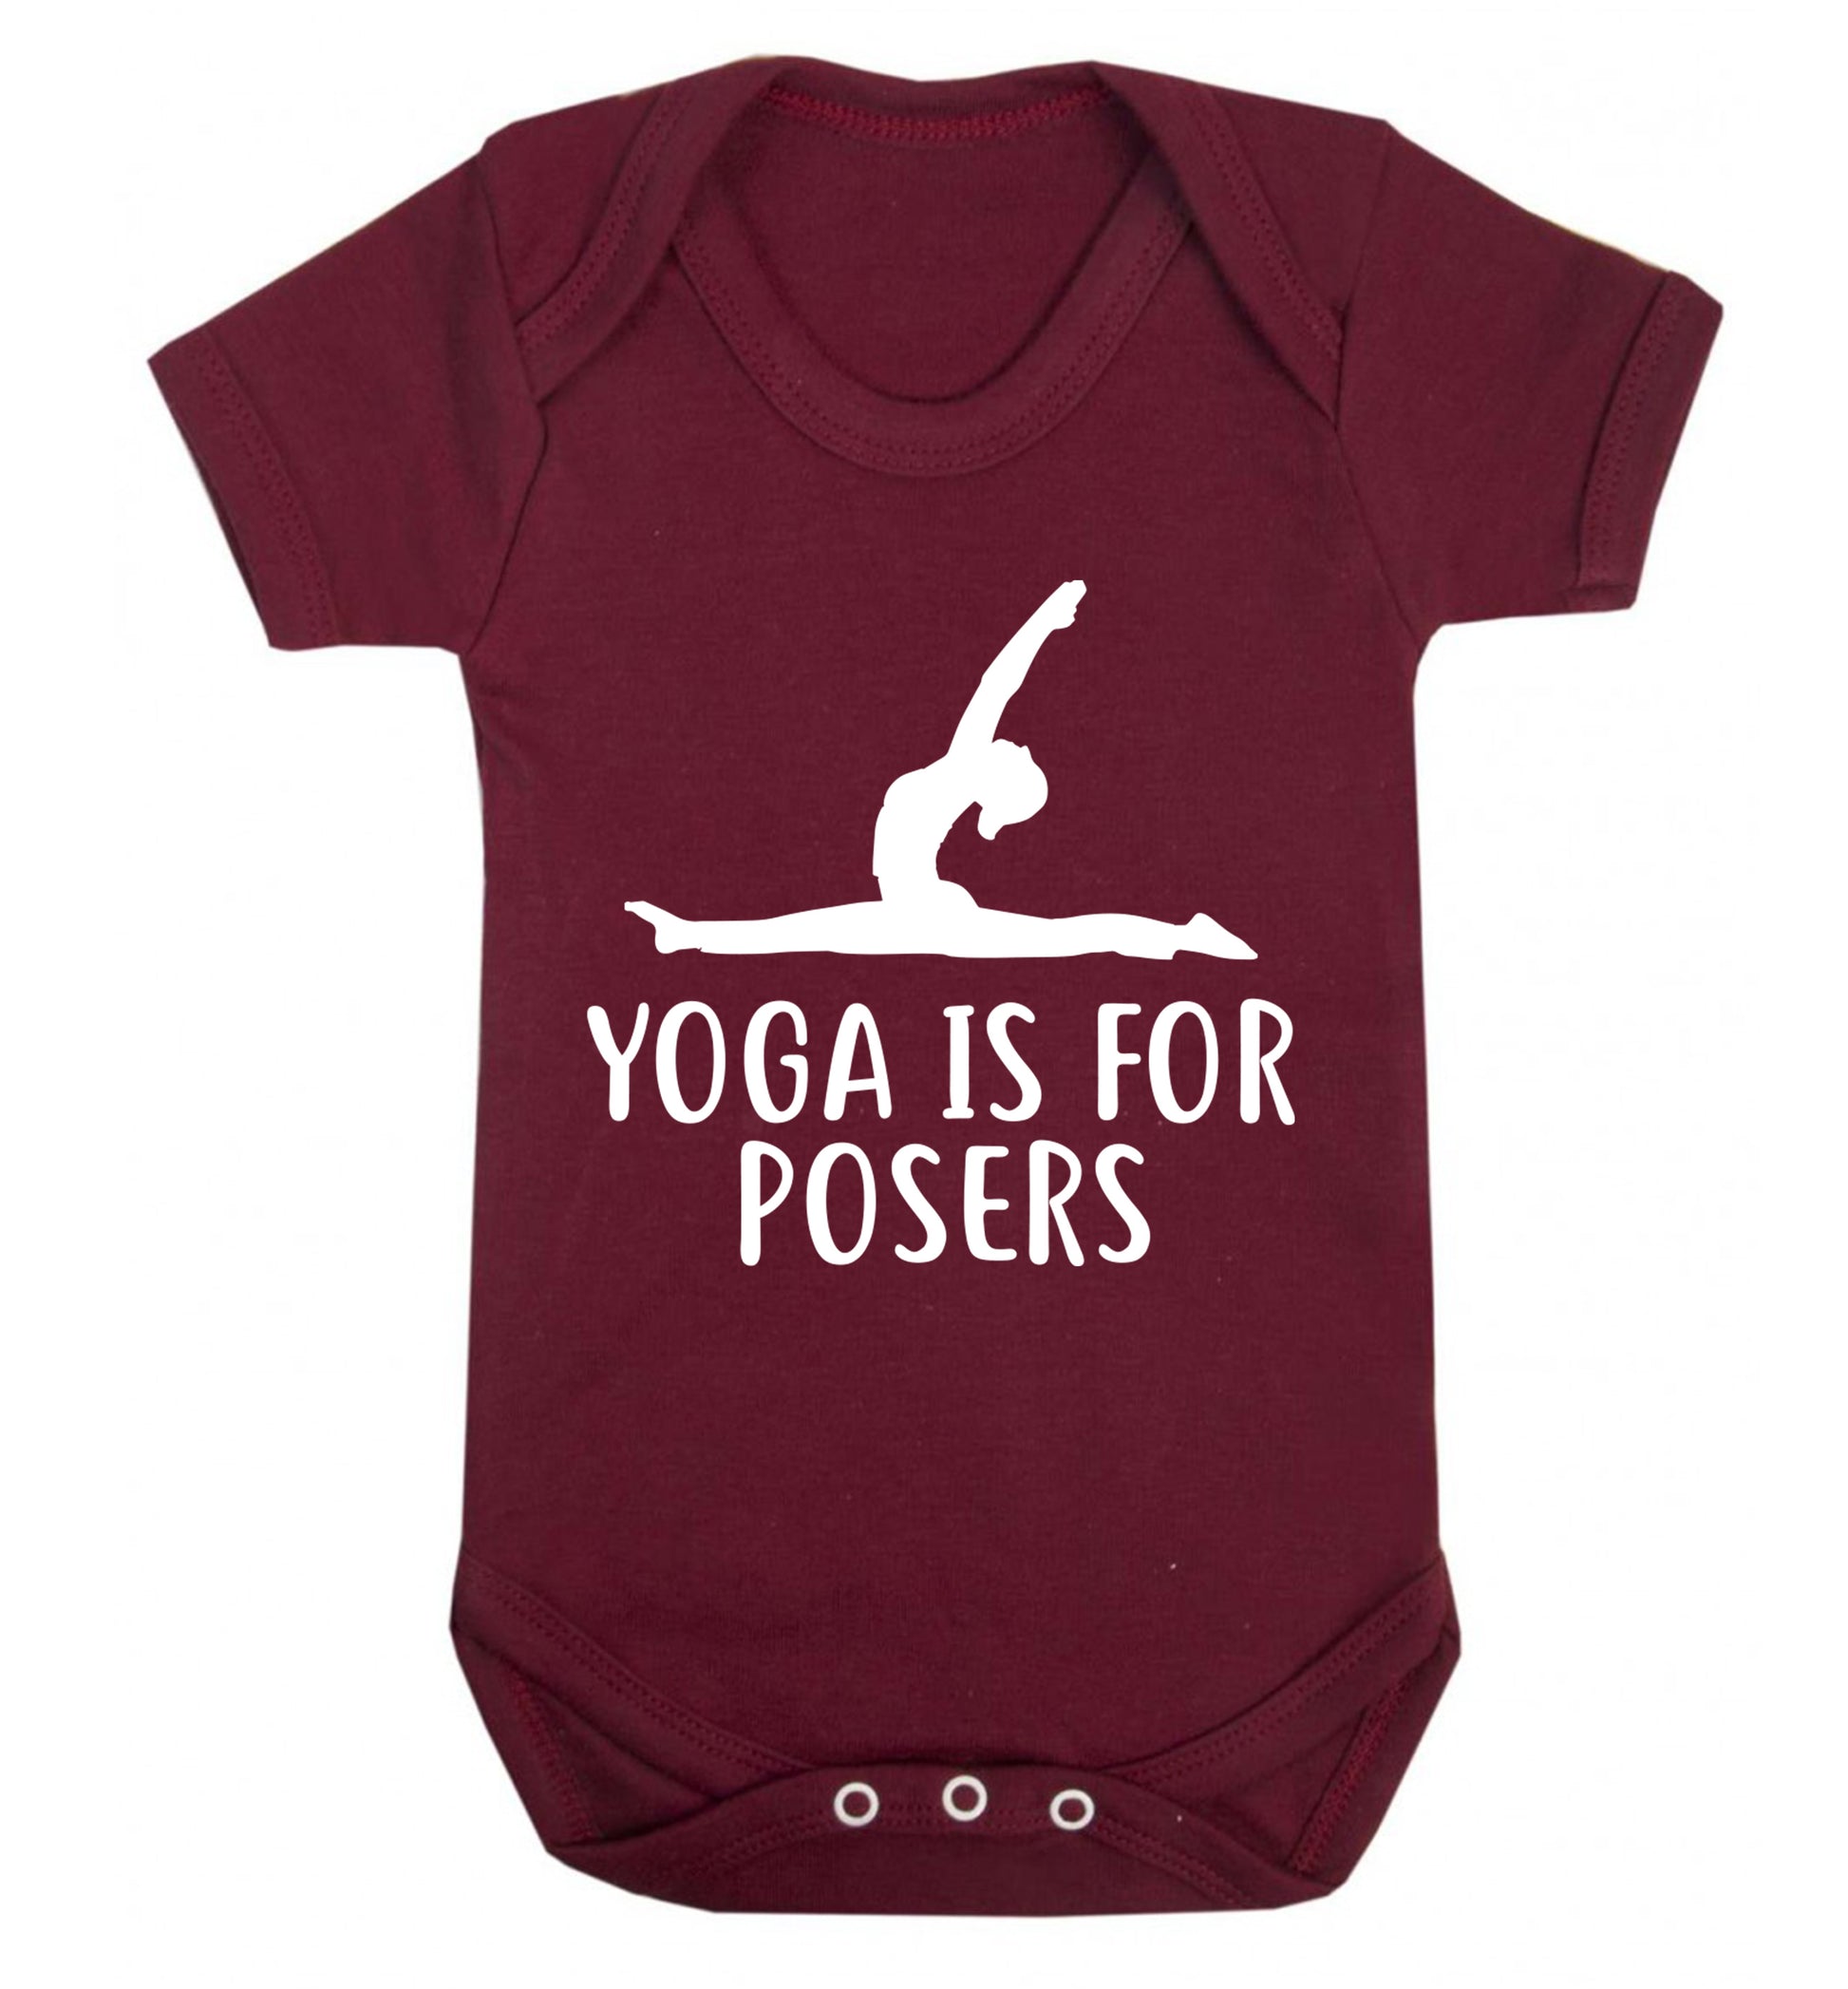 Yoga is for posers Baby Vest maroon 18-24 months